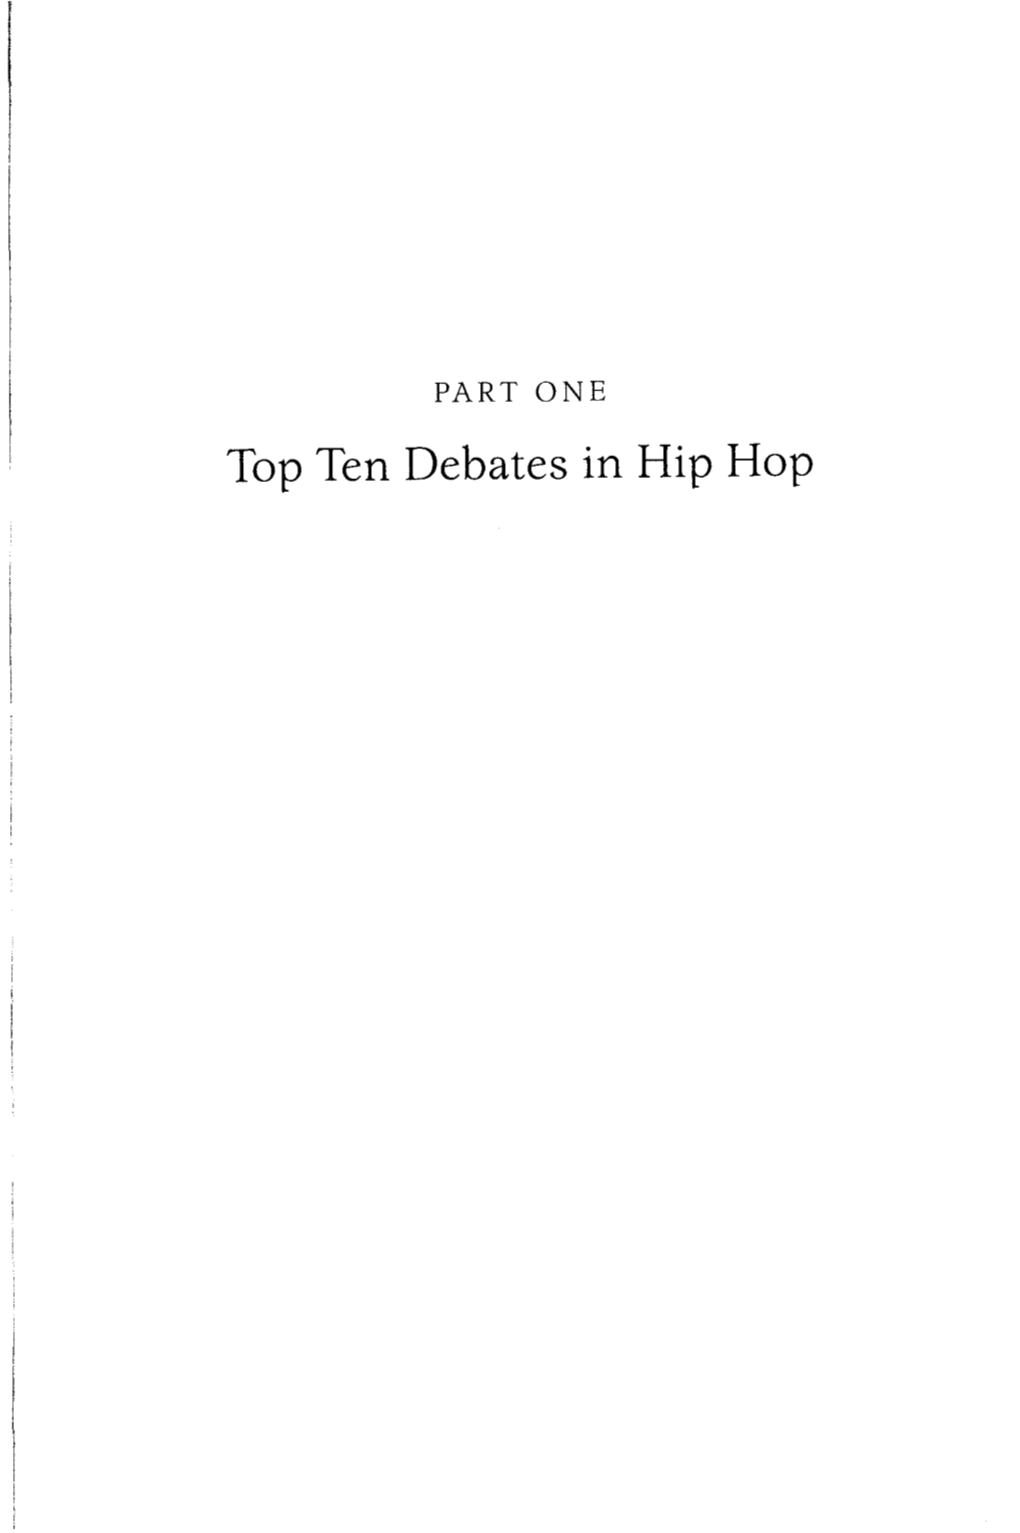 THE HIP HOP WARS Executives Will Read This Book, See Themselves As Part of the Solution, and Work Harder to Develop Community-Enabling Ways to Stay in Busi- Ness